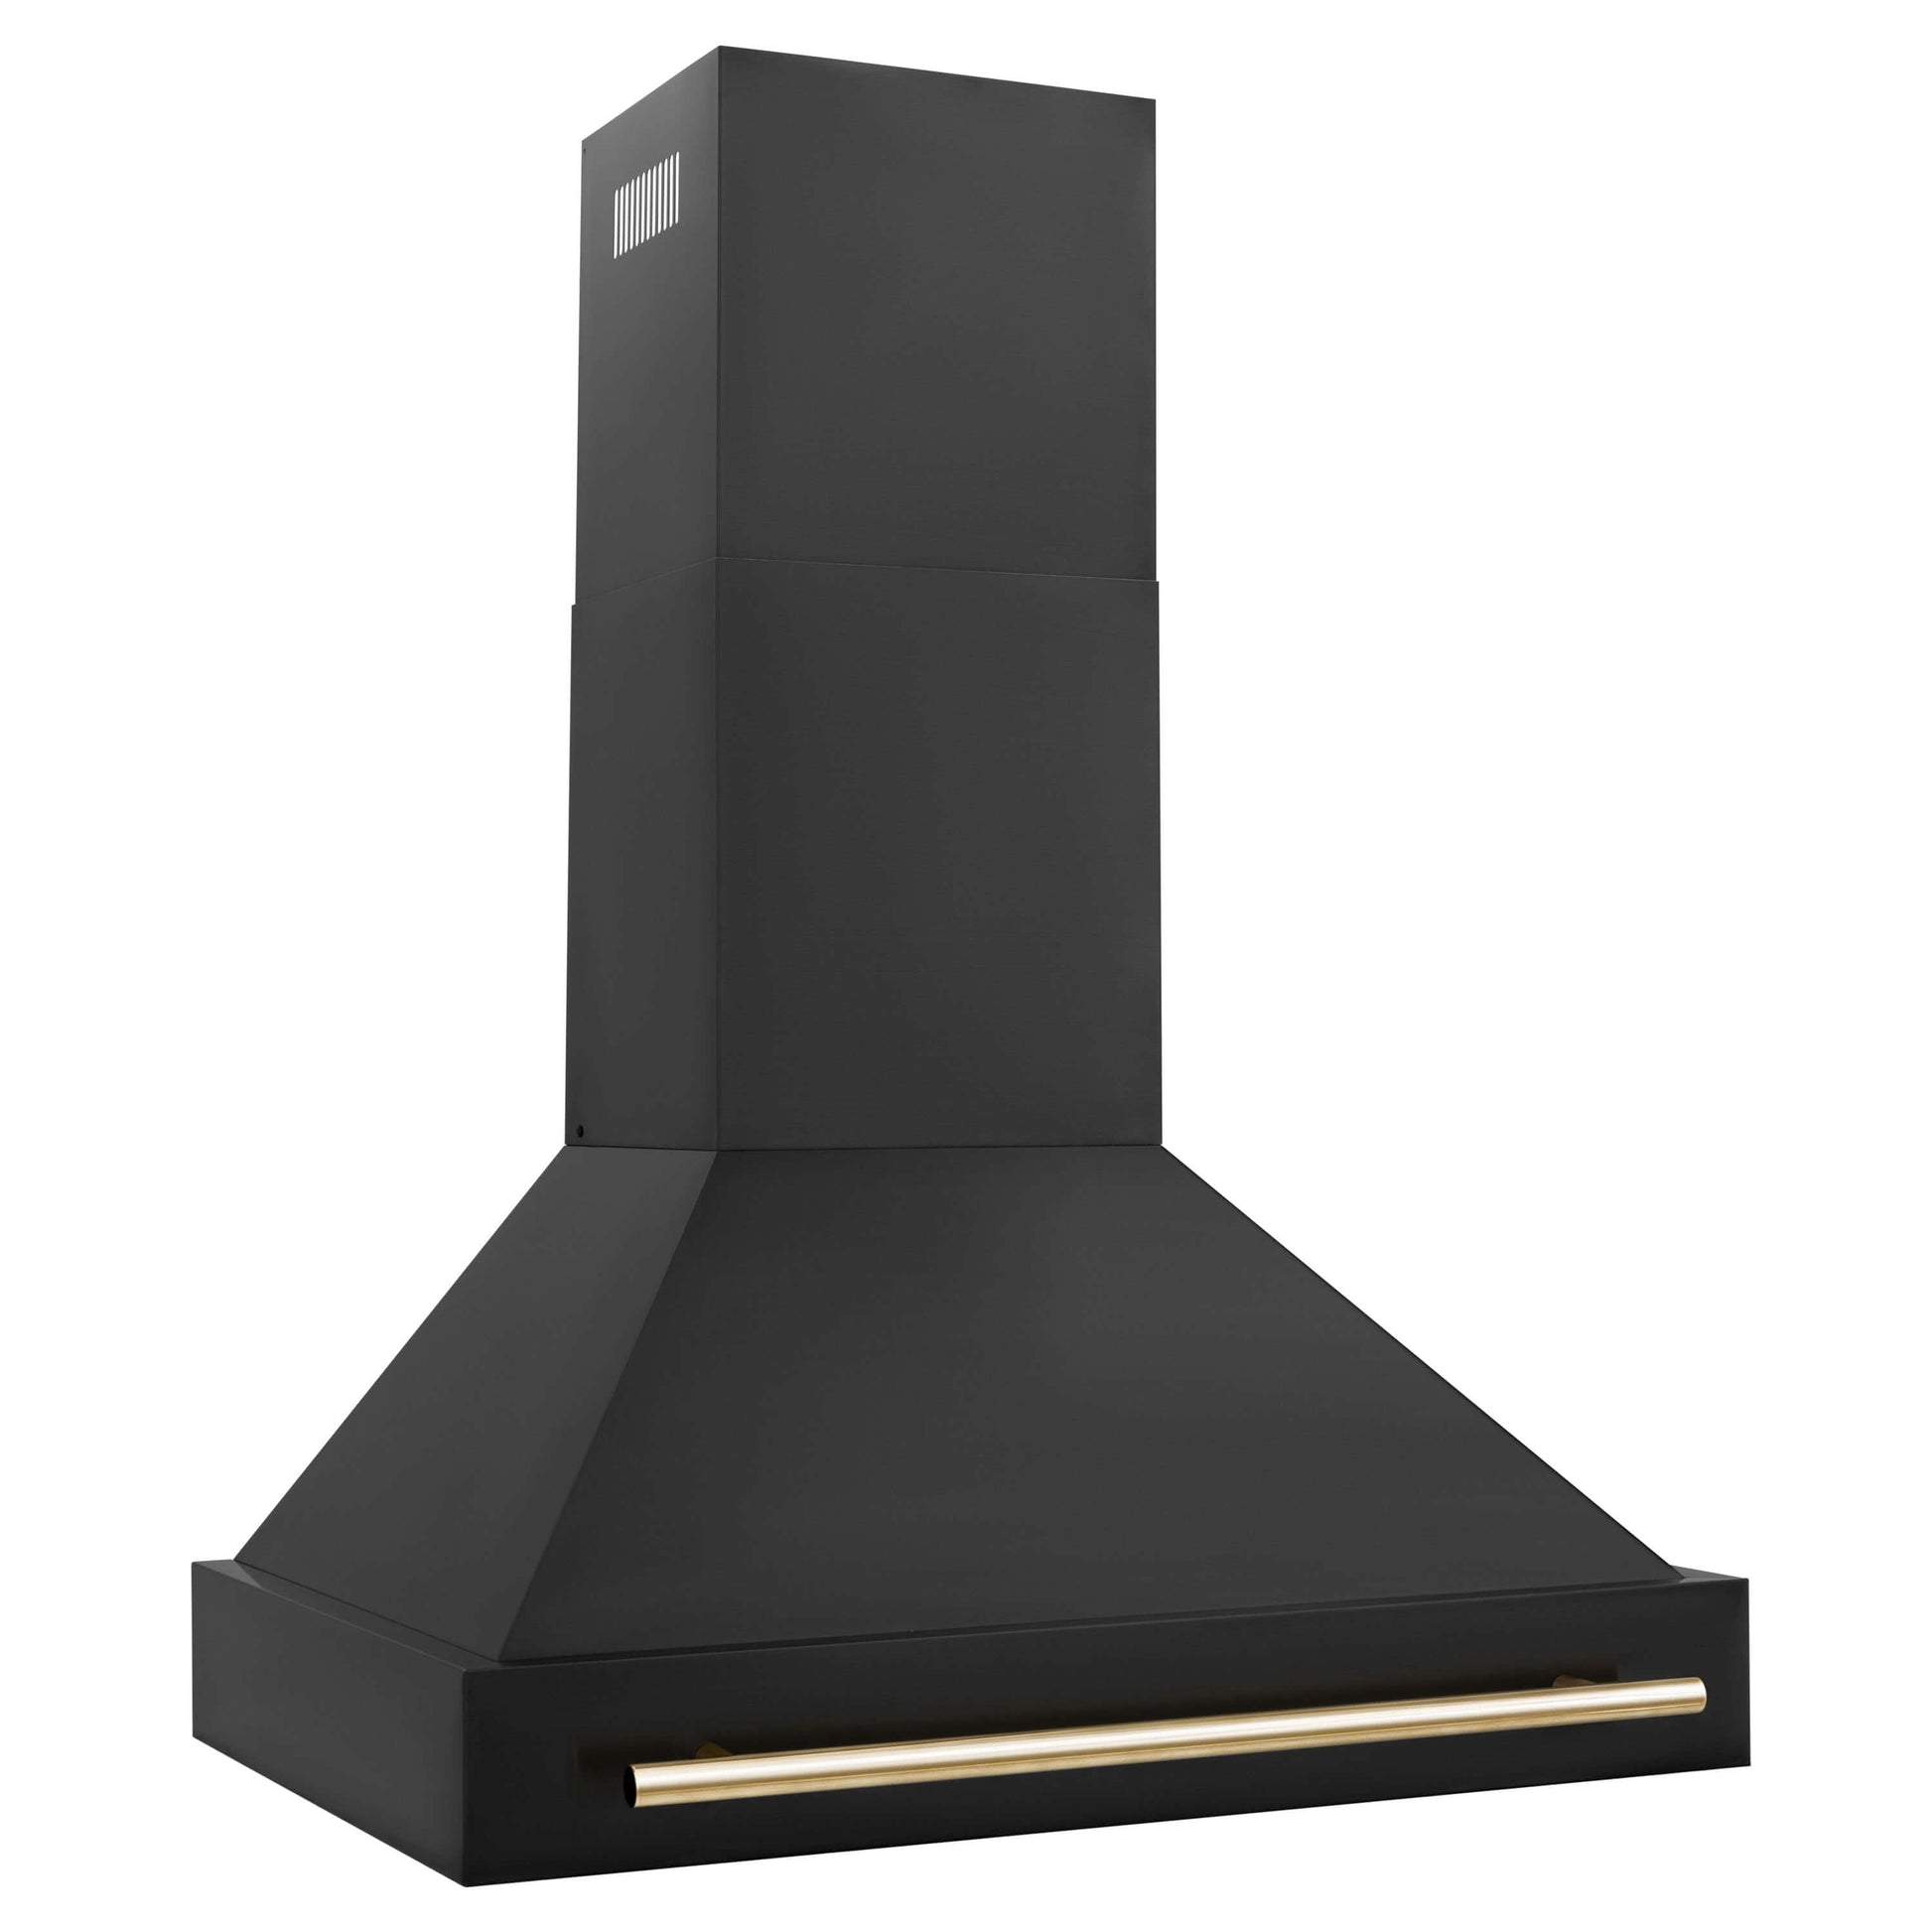 ZLINE Autograph Edition 36 in. Black Stainless Steel Range Hood with Handle (BS655Z-36) Polished Gold side